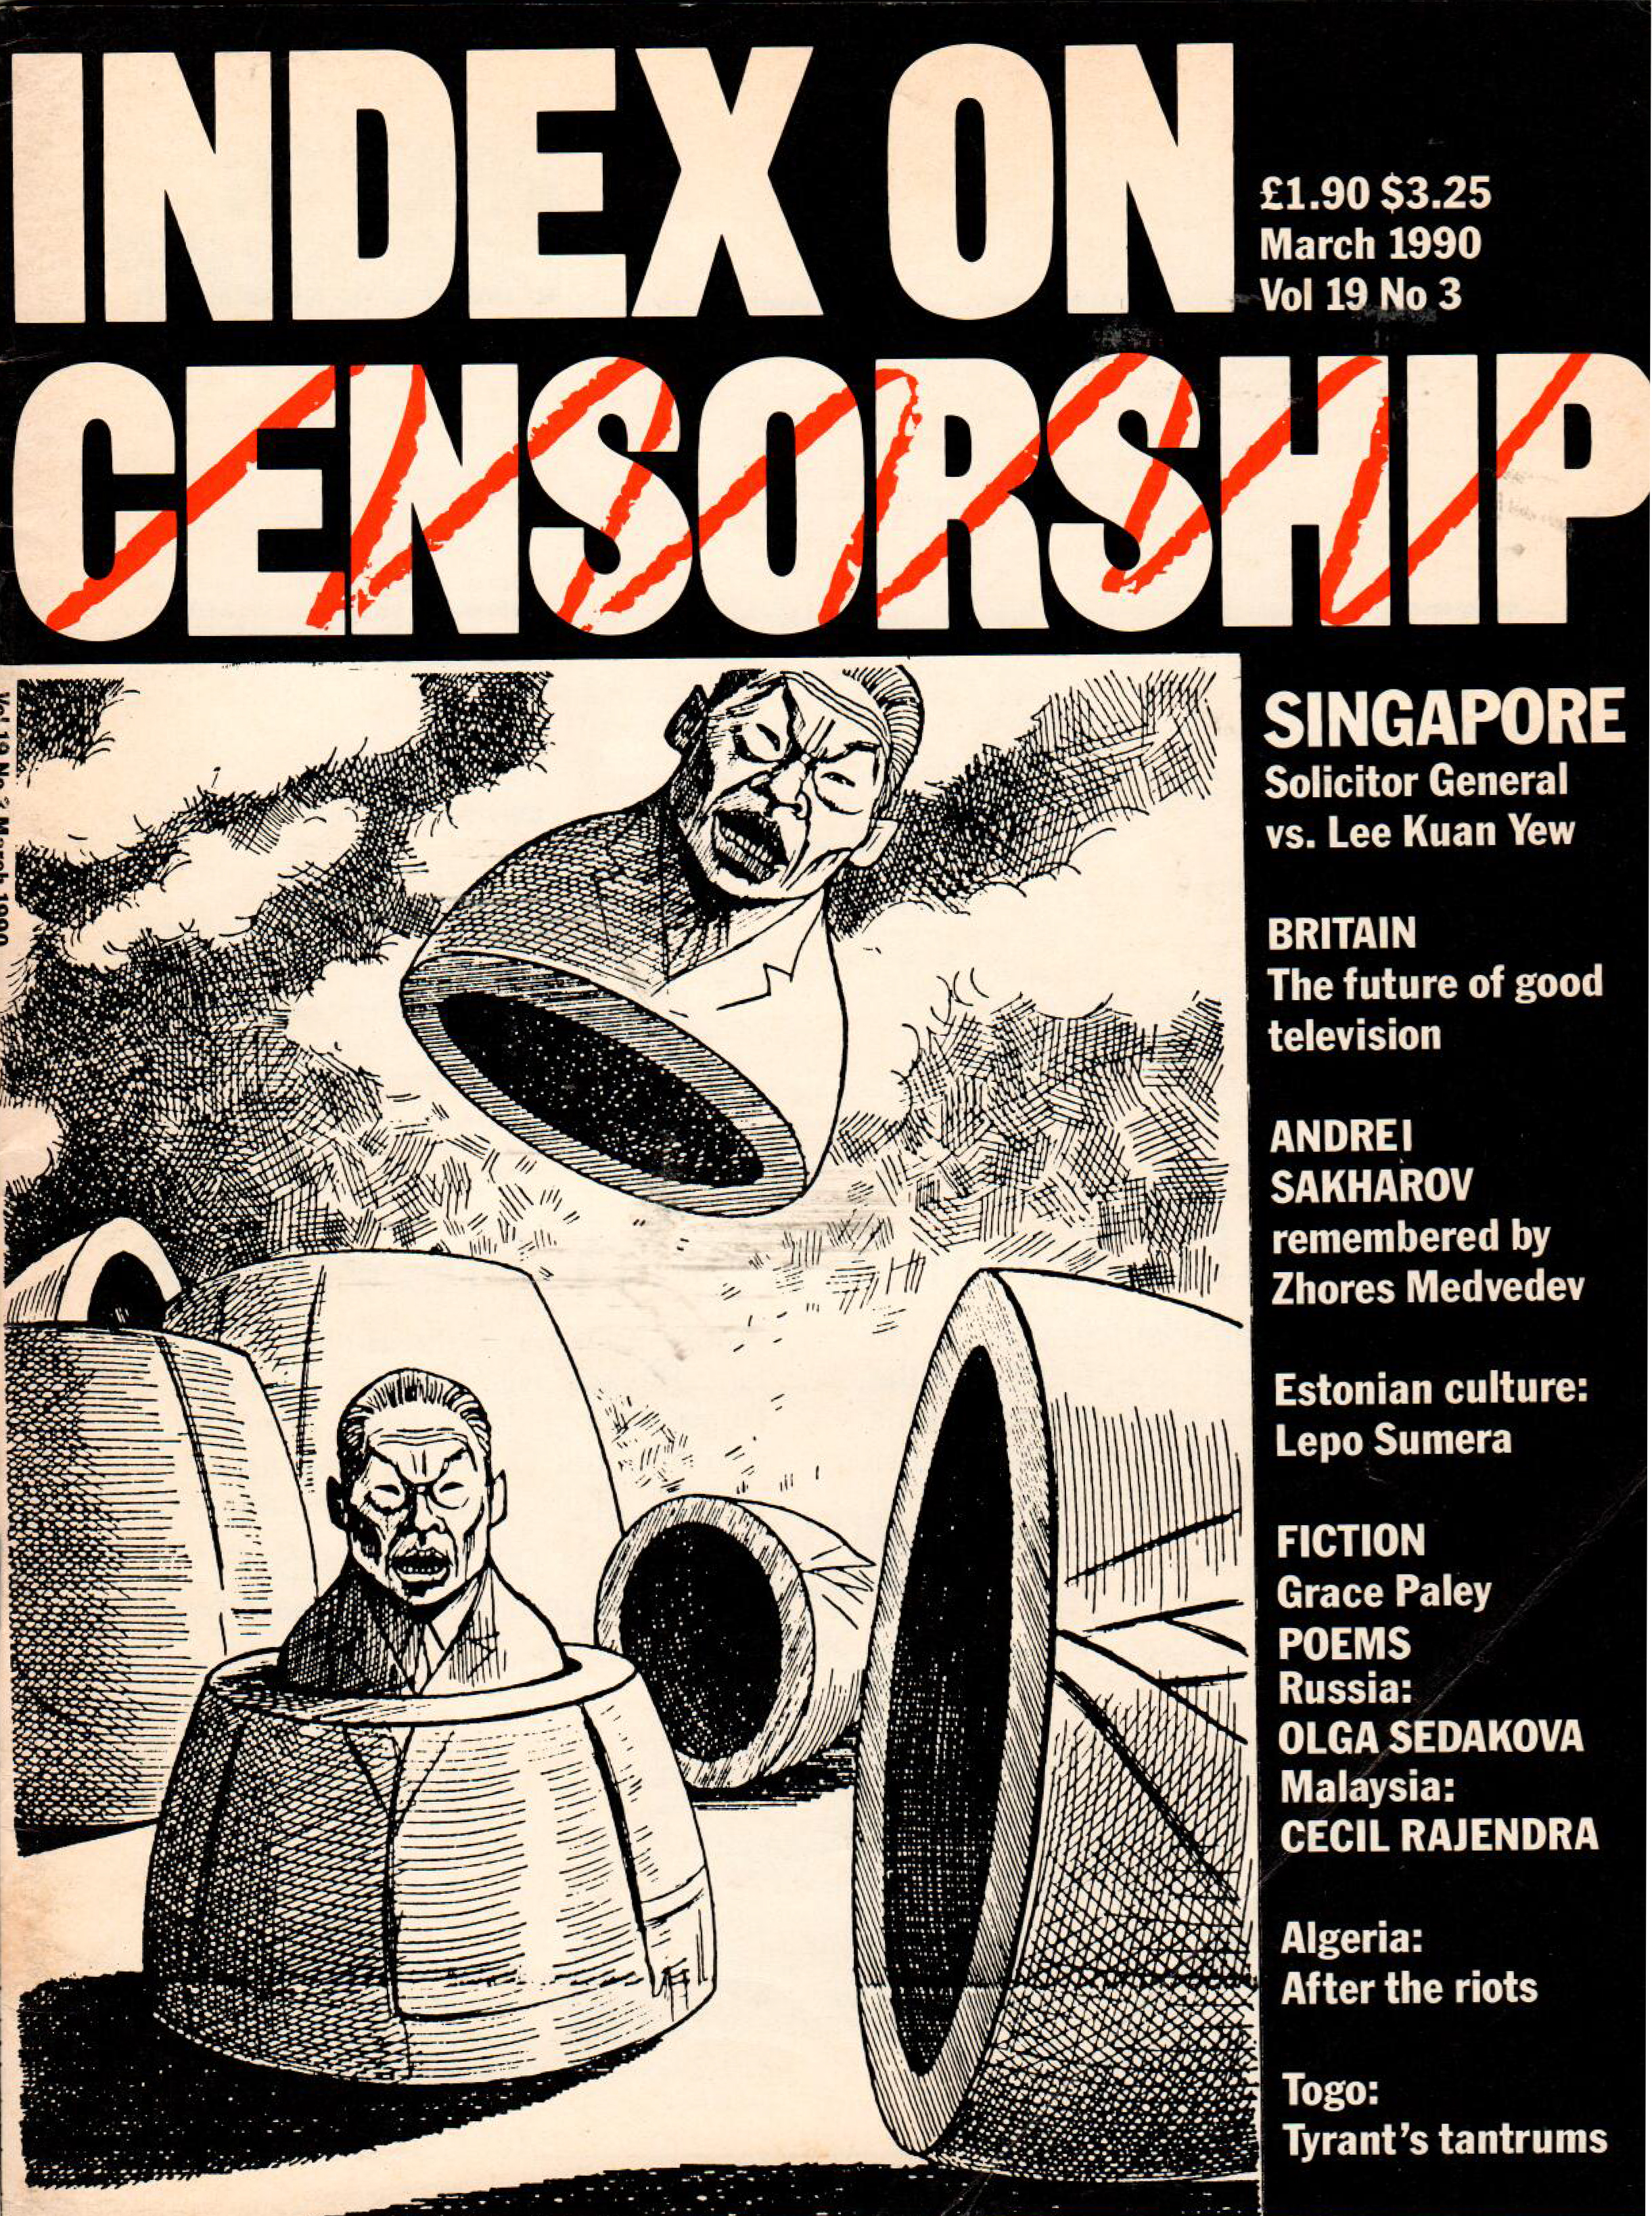 Singapore Solicitor General vs. Lee Kuan Yew, the March 1990 issue of Index on Censorship Magazine.